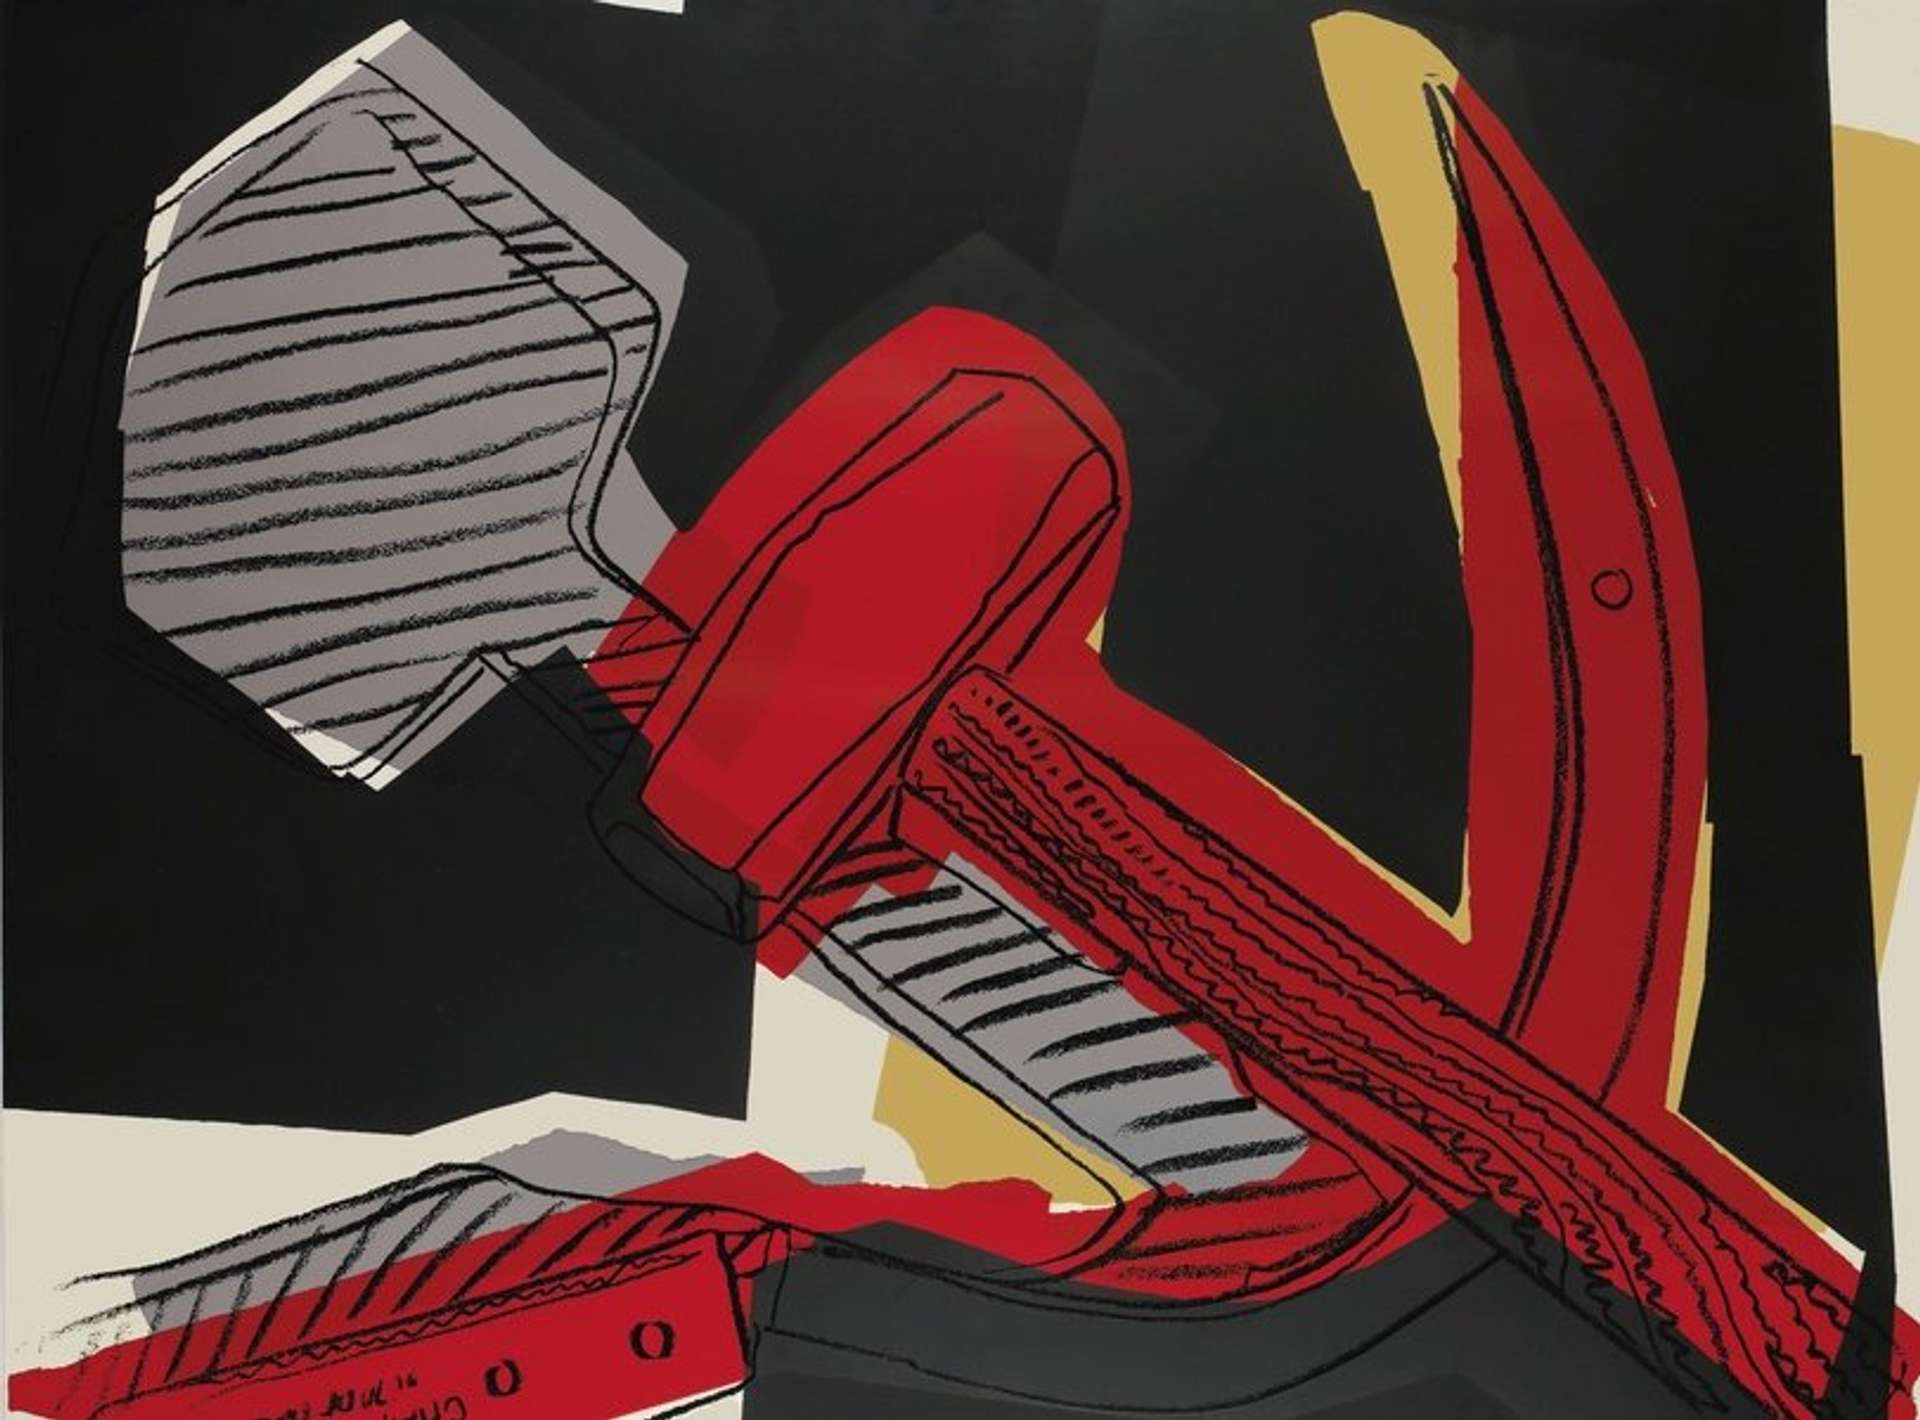 10 Facts About Andy Warhol's Hammer And Sickle